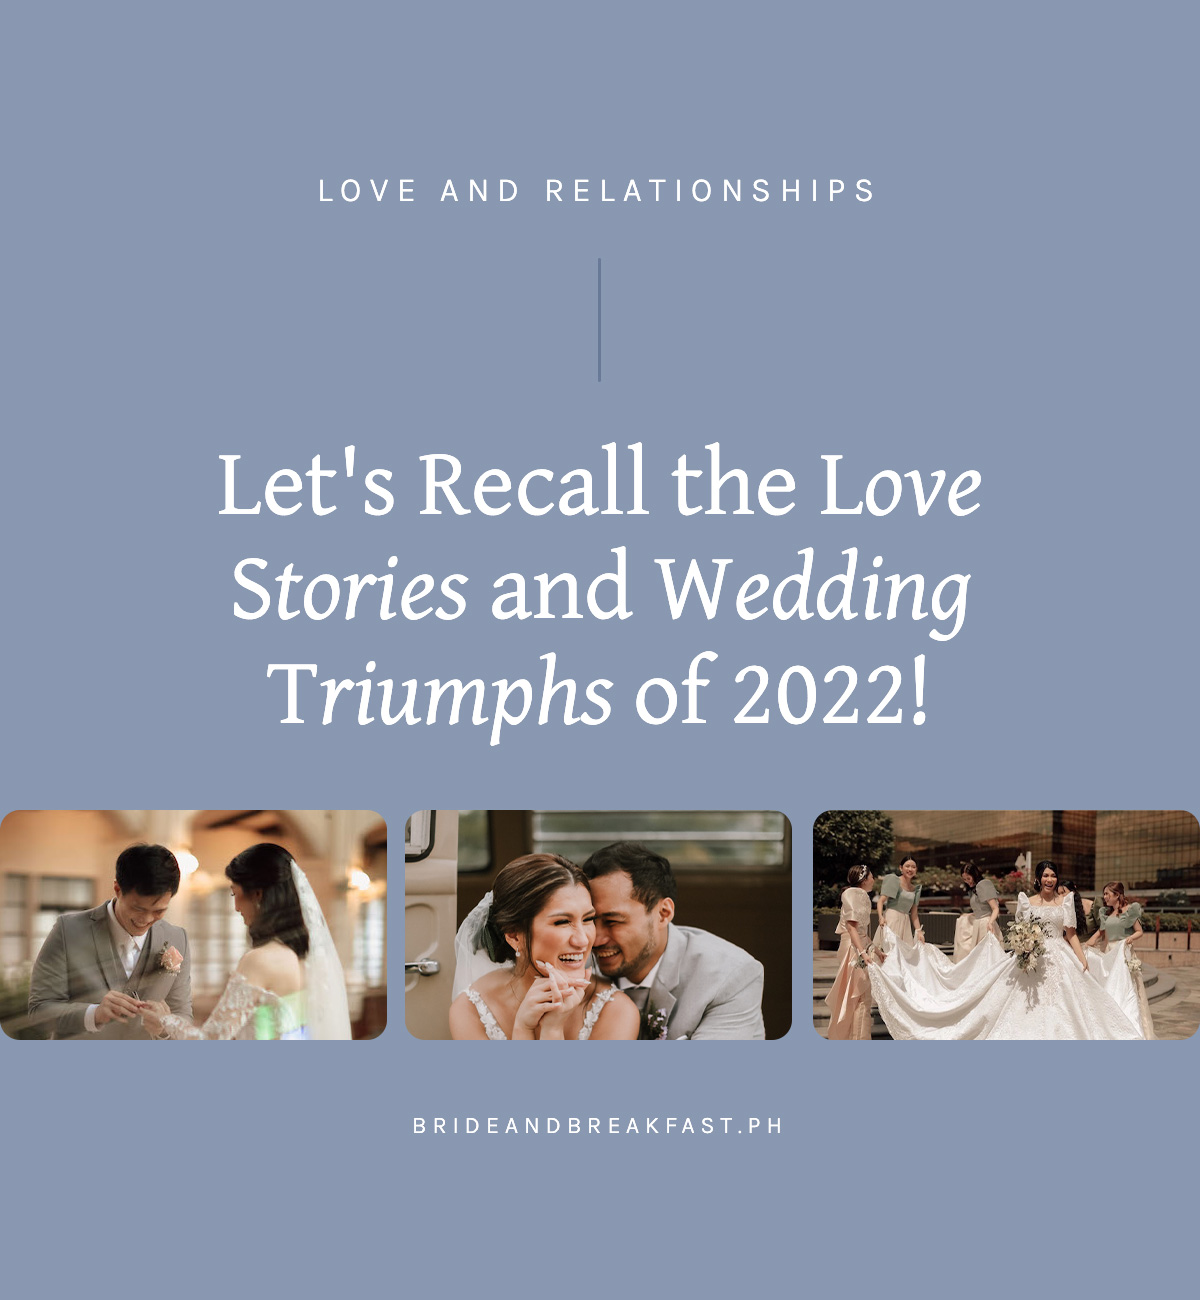 Let's Recall the Love Stories and Wedding Triumphs of 2022!